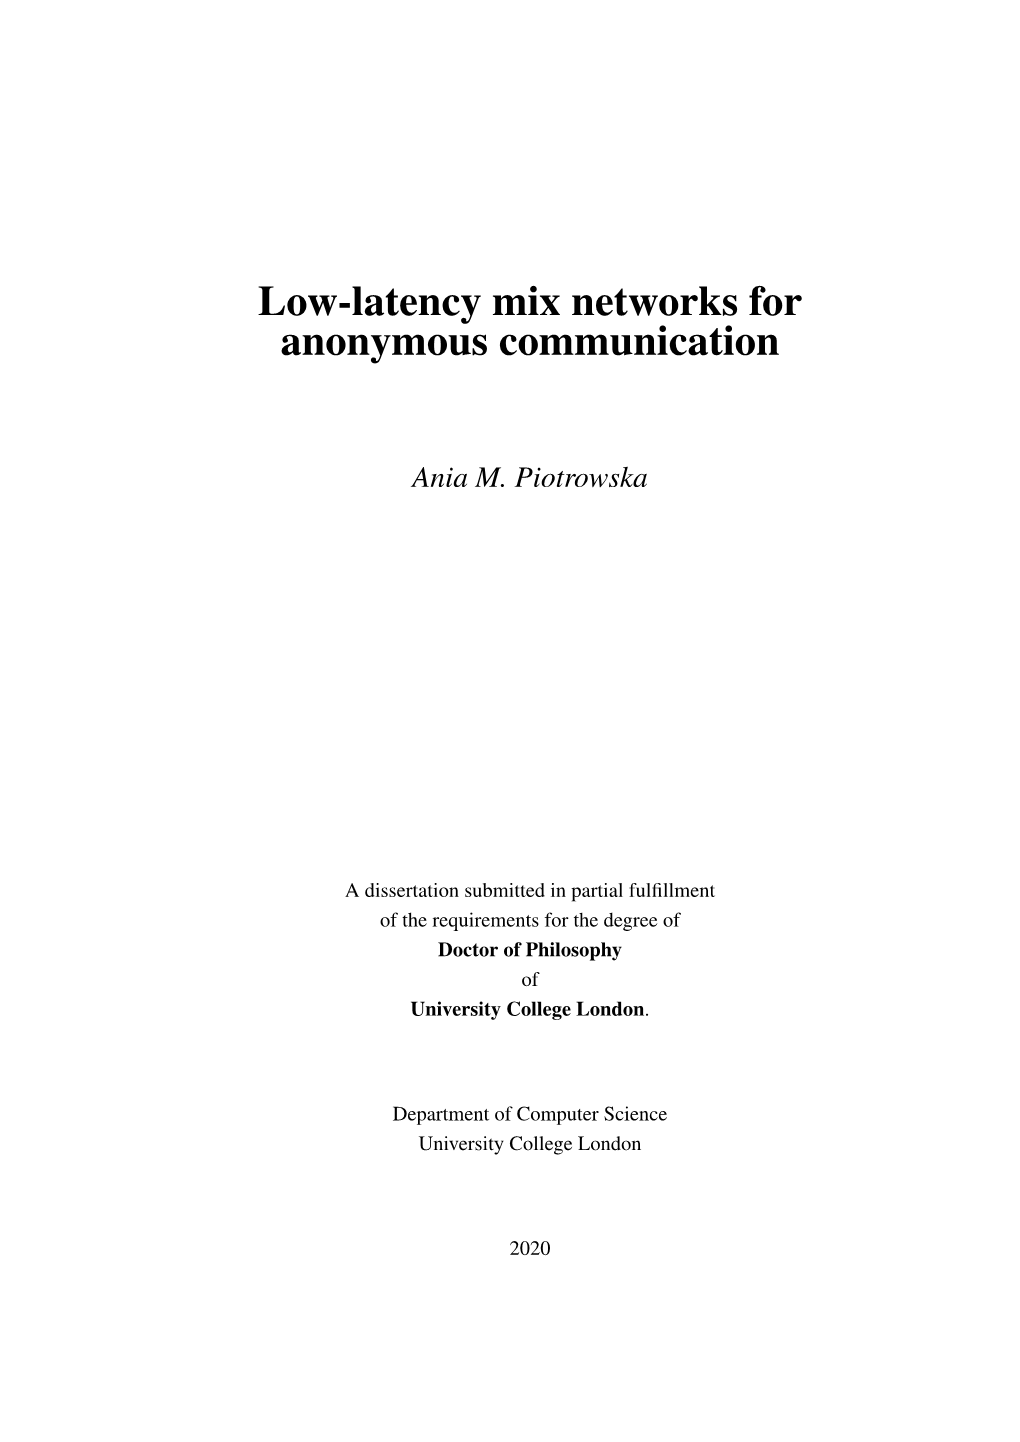 Low-Latency Mix Networks for Anonymous Communication